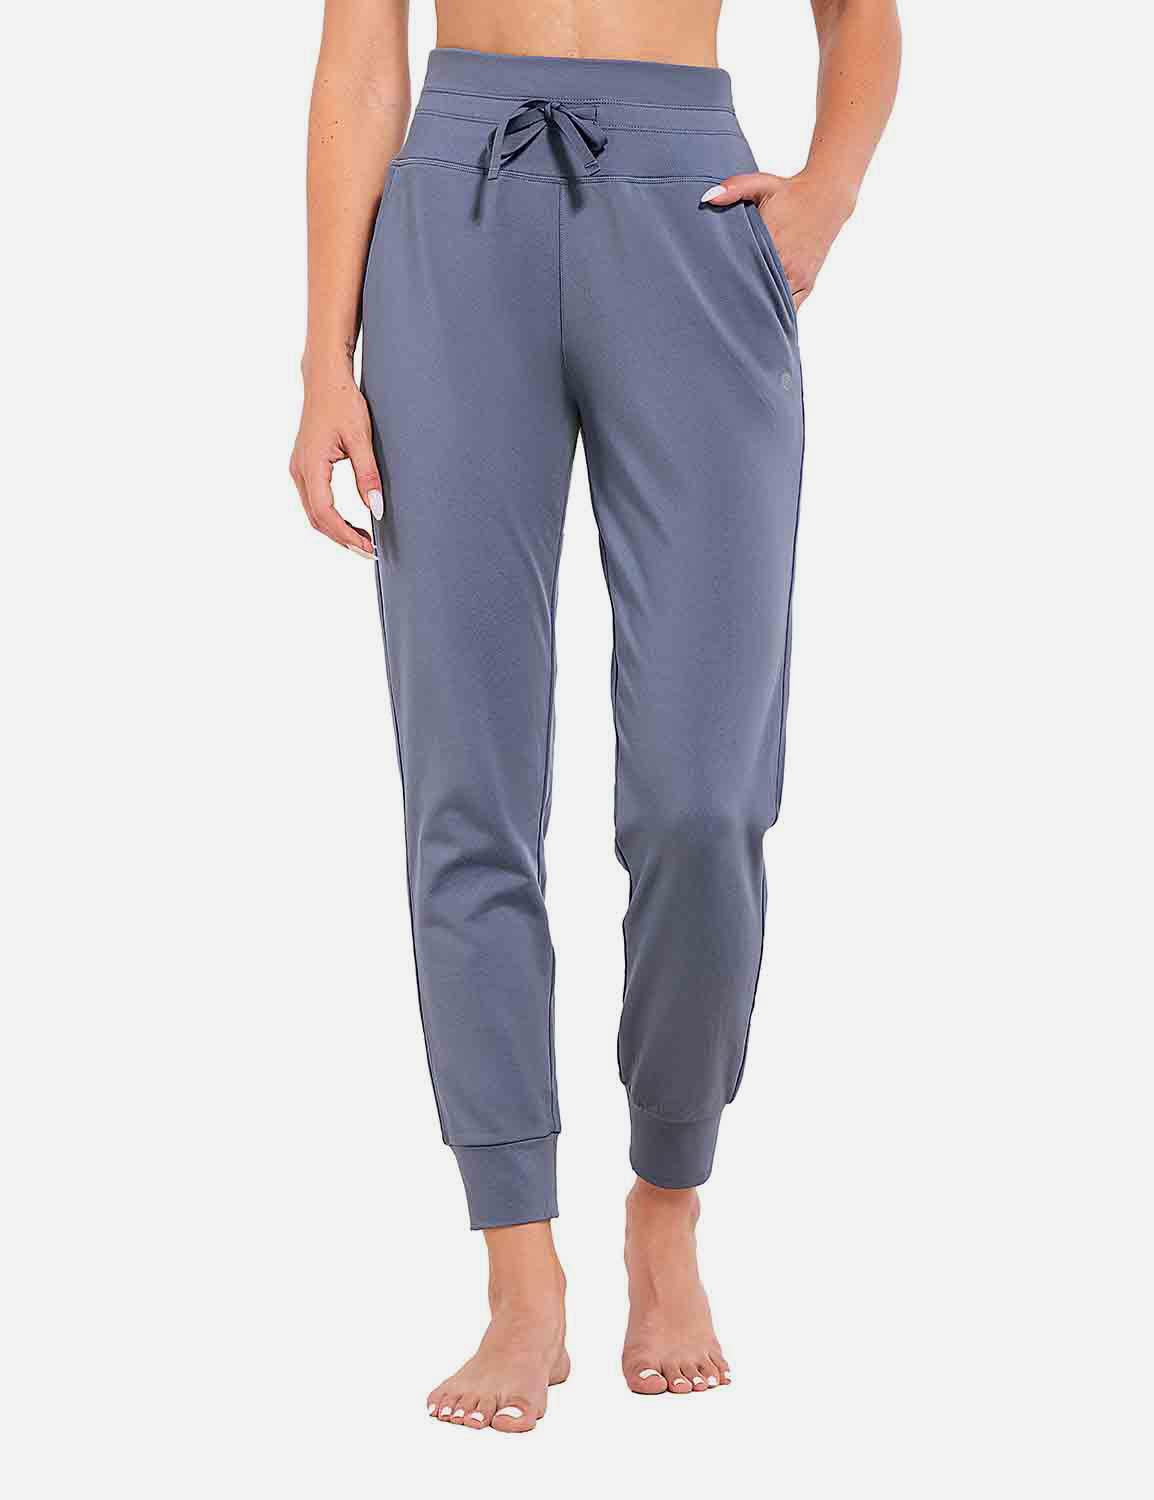 Baleaf Women's High Rise Water Resistant Tapered Joggers – Baleaf